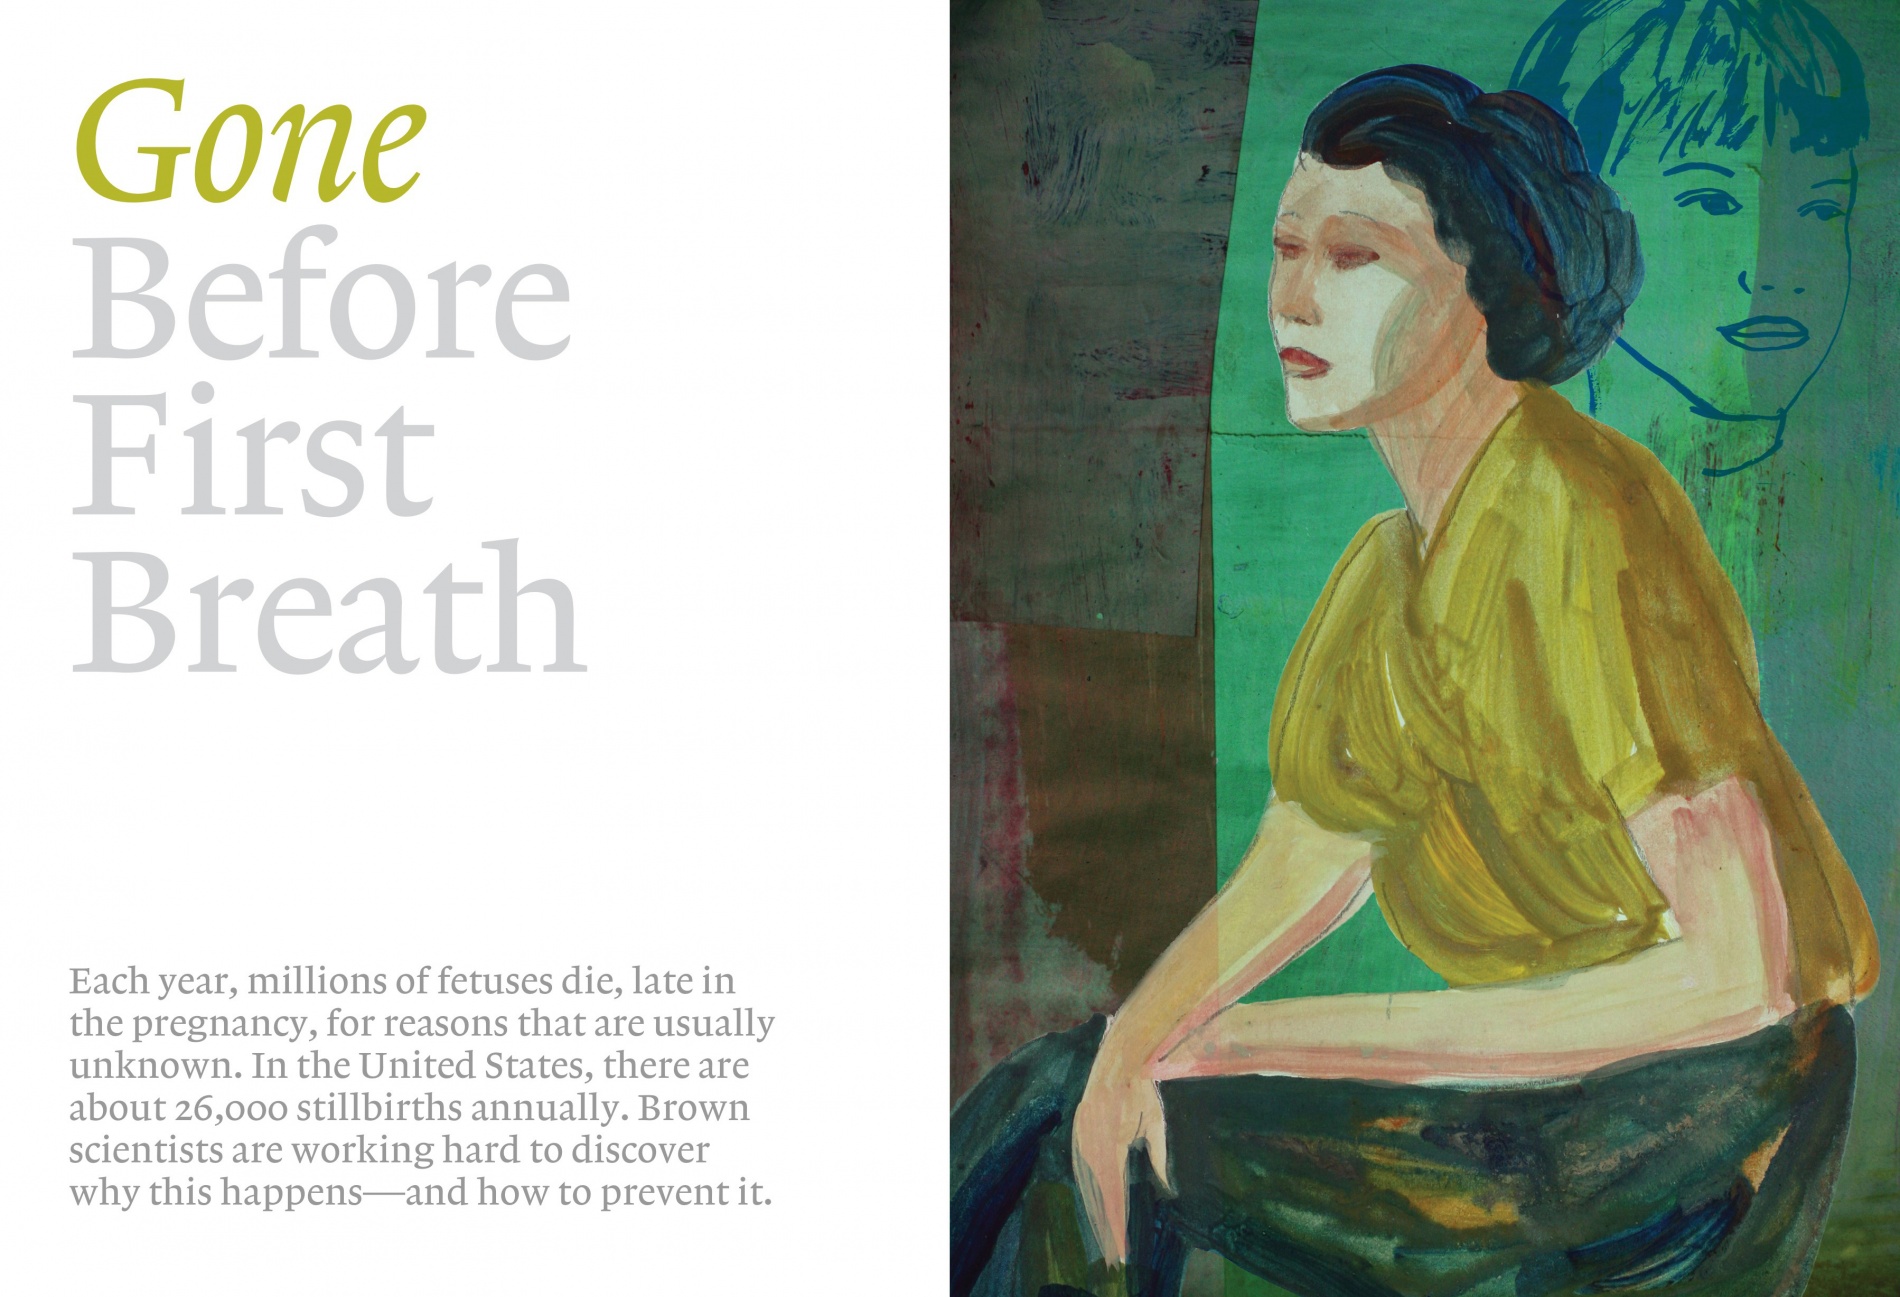 A painting of a woman in green against a green background. Title reads: Gone Before First Breath. Subtitle reads: Each year, millions of fetuses die, late in the pregnancy, for reasons that are usually unknown. In the United States, there are about 26,000 stillbirths annually. Brown scientists are working hard to discover why this happens—and how to prevent it.